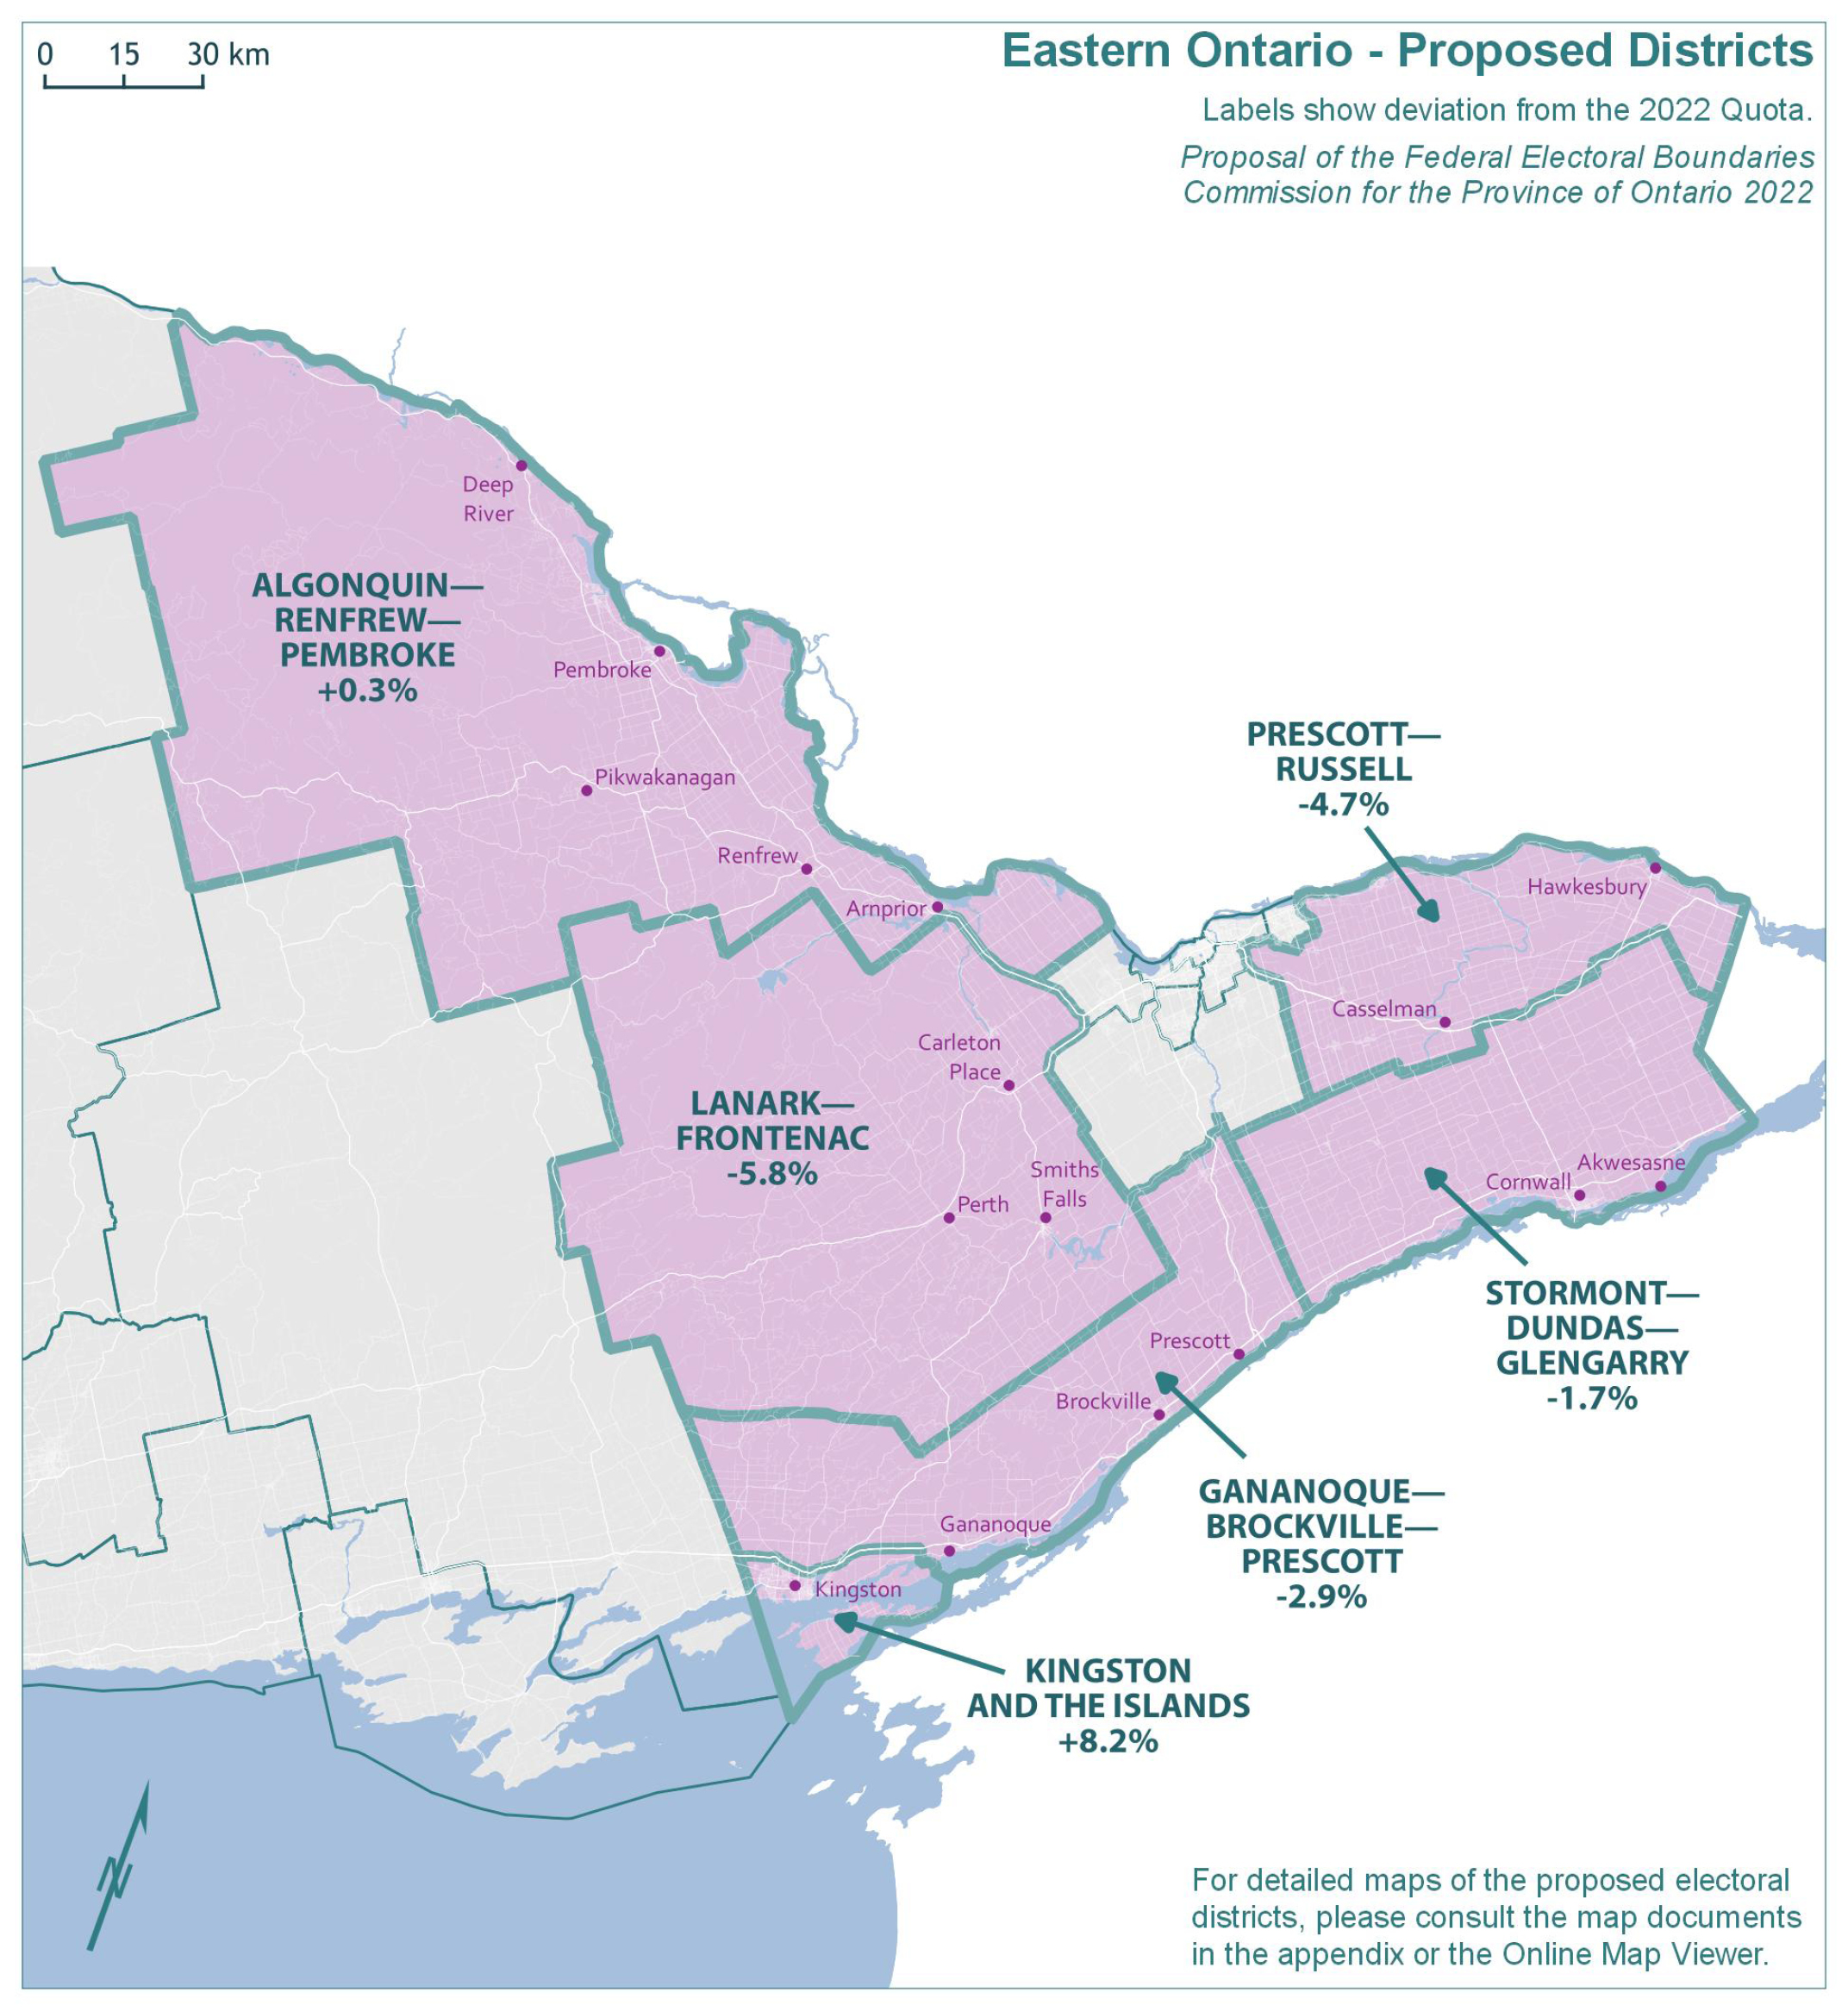 Eastern Ontario - Proposed Districts 